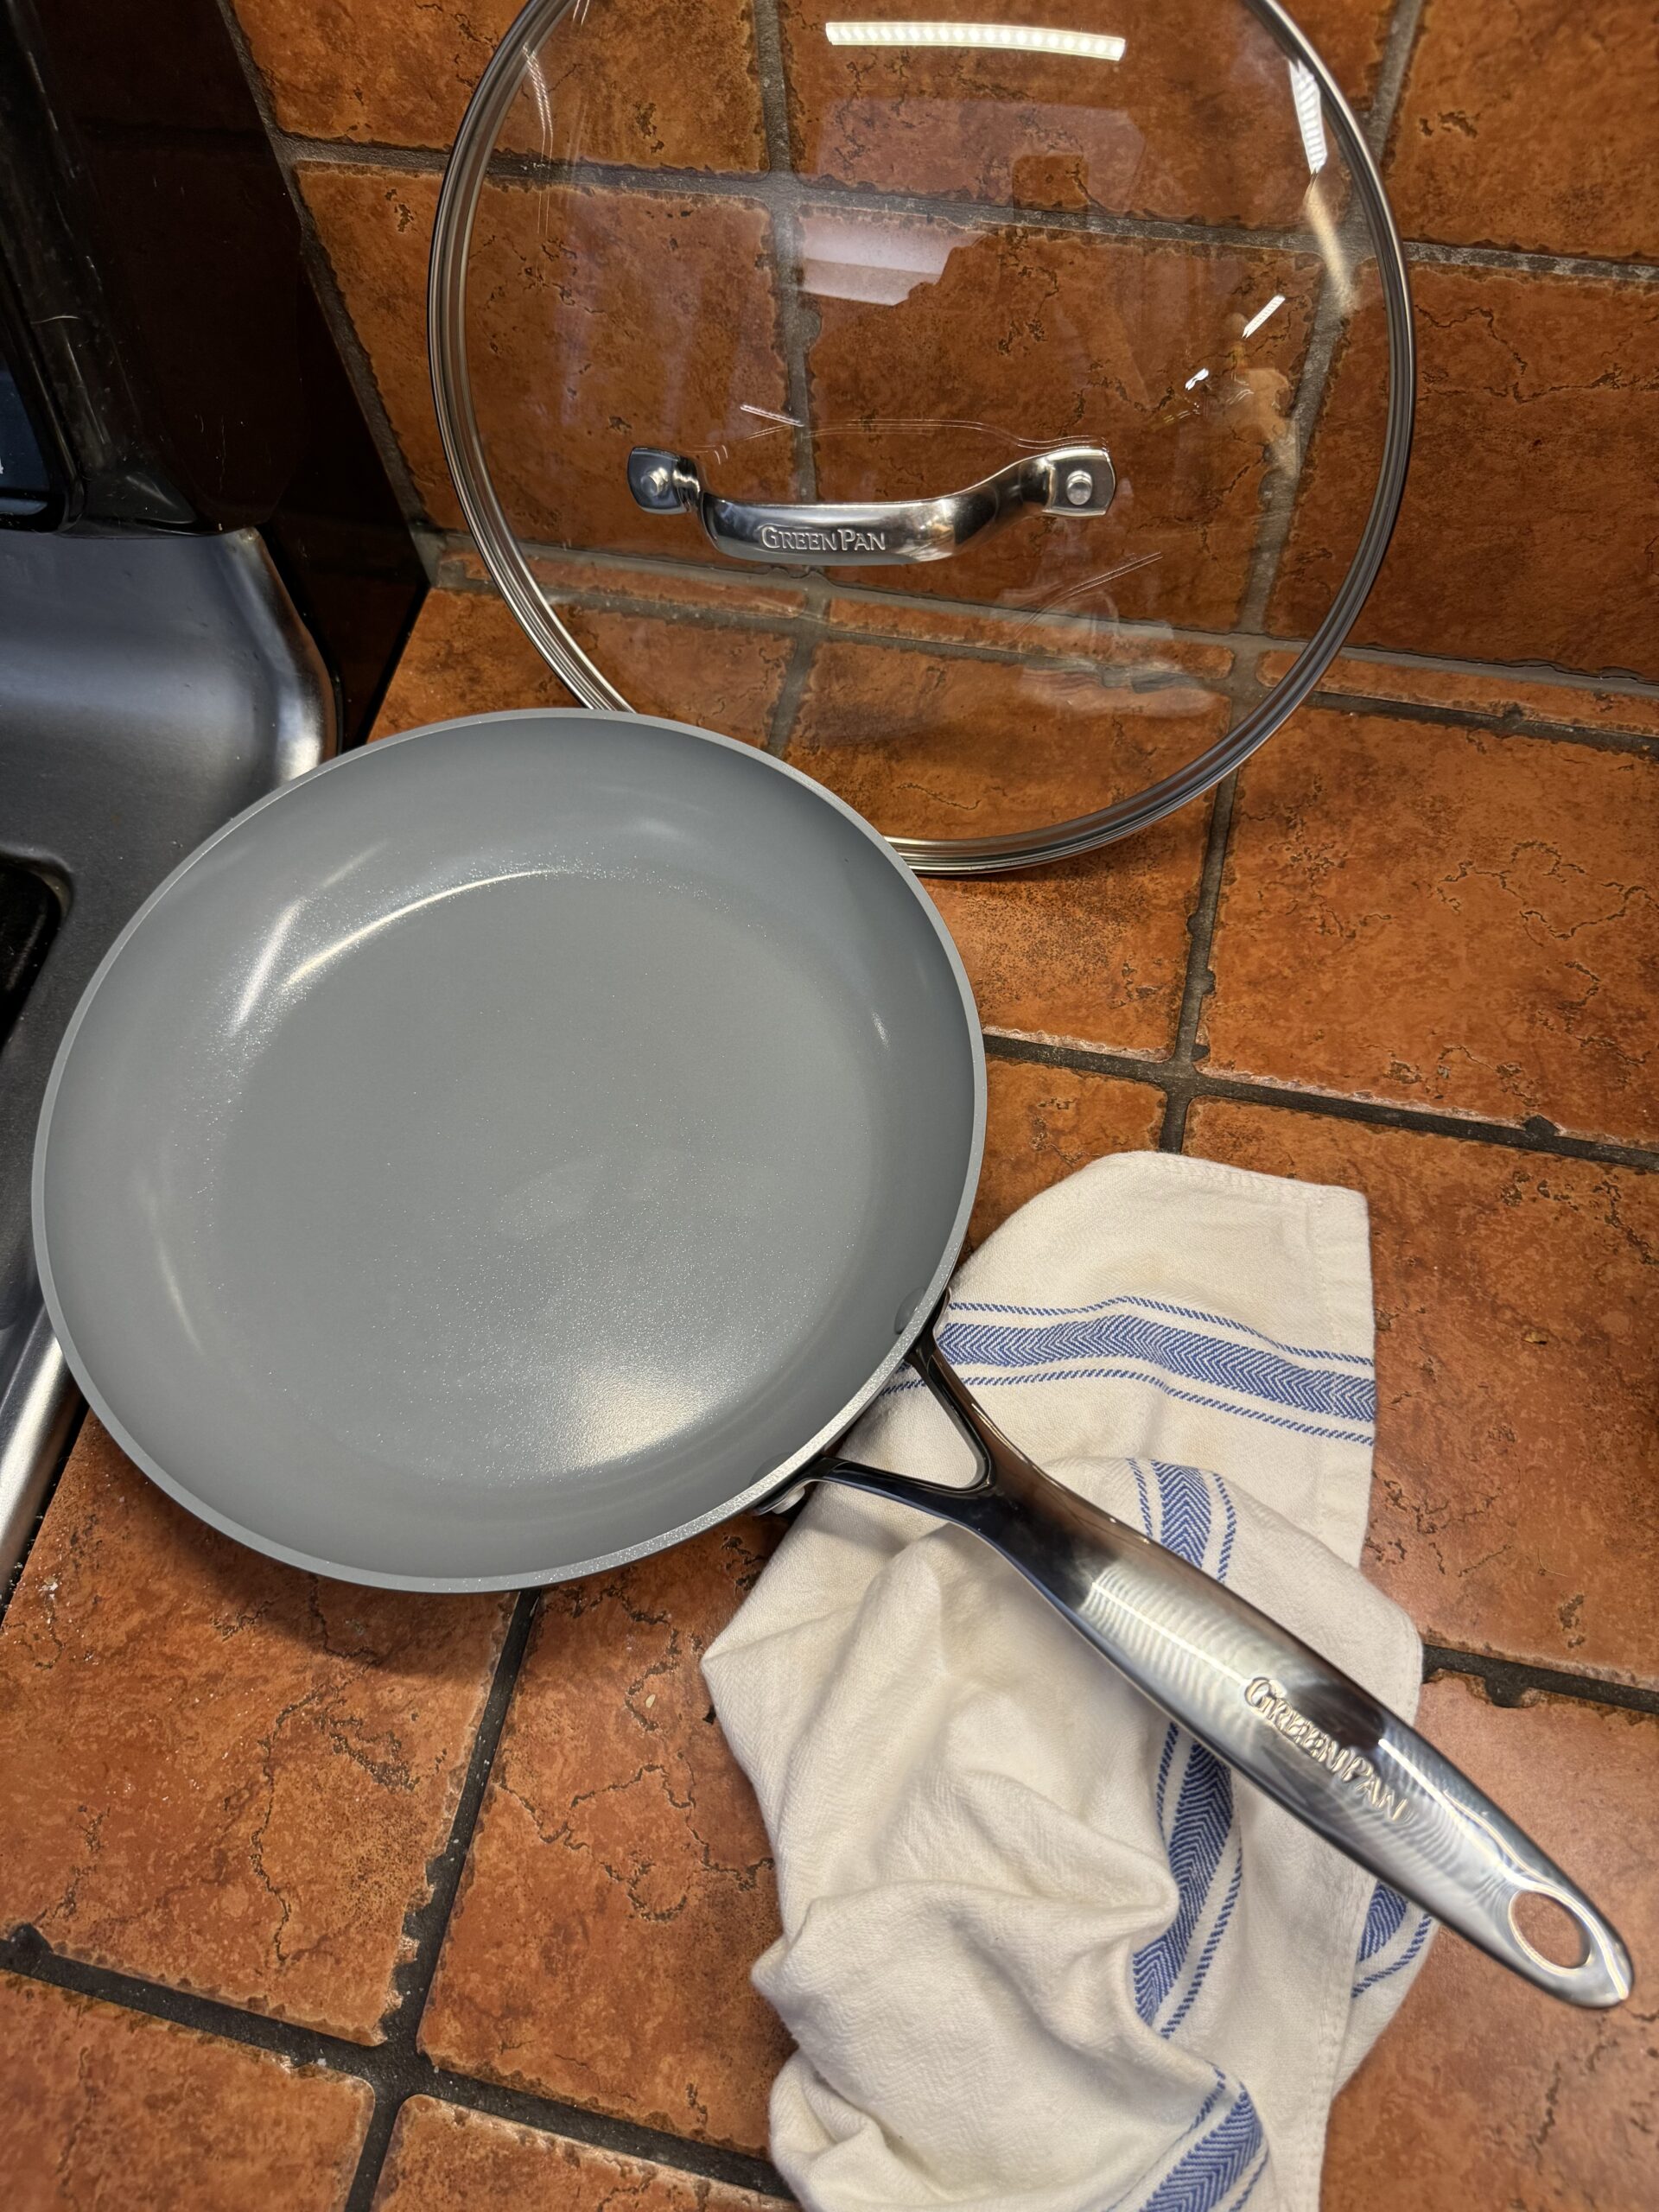 A grey non-stick frying pan with a glass lid, placed on a tiled kitchen countertop next to a white and blue striped dish towel.